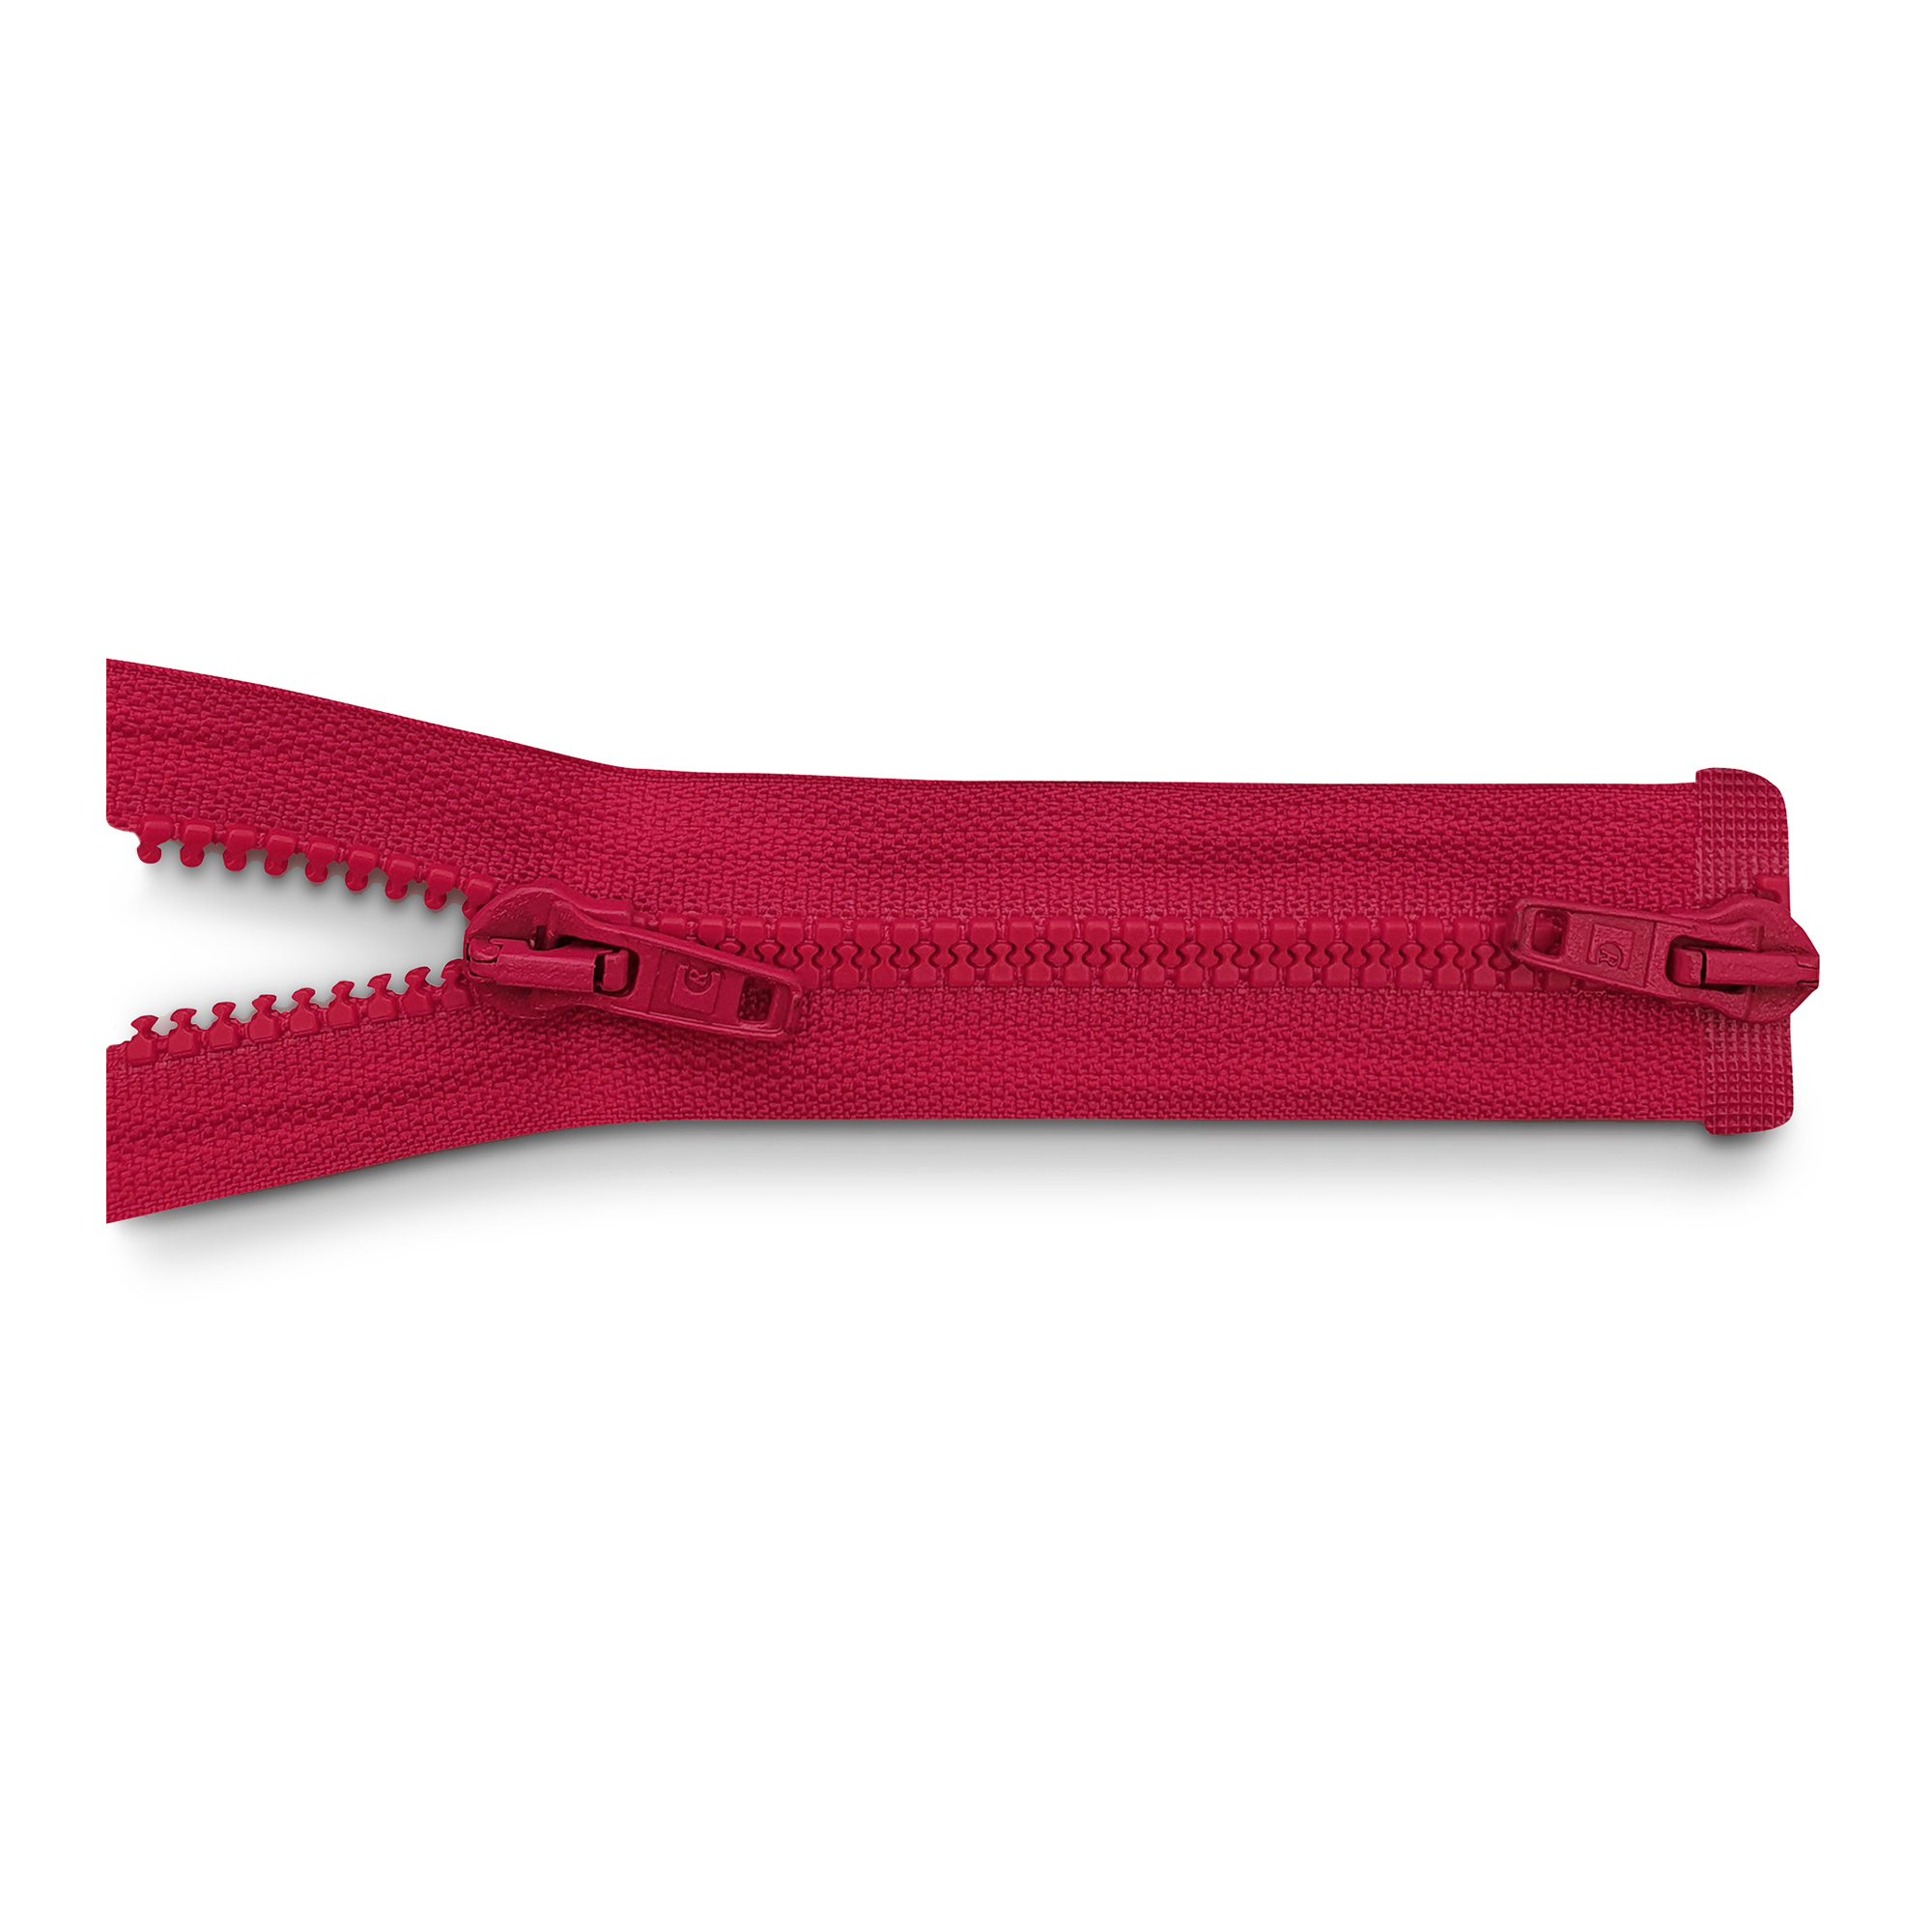 zipper 100cm,  divisible, 2way, molded plastic, wide, chili/red